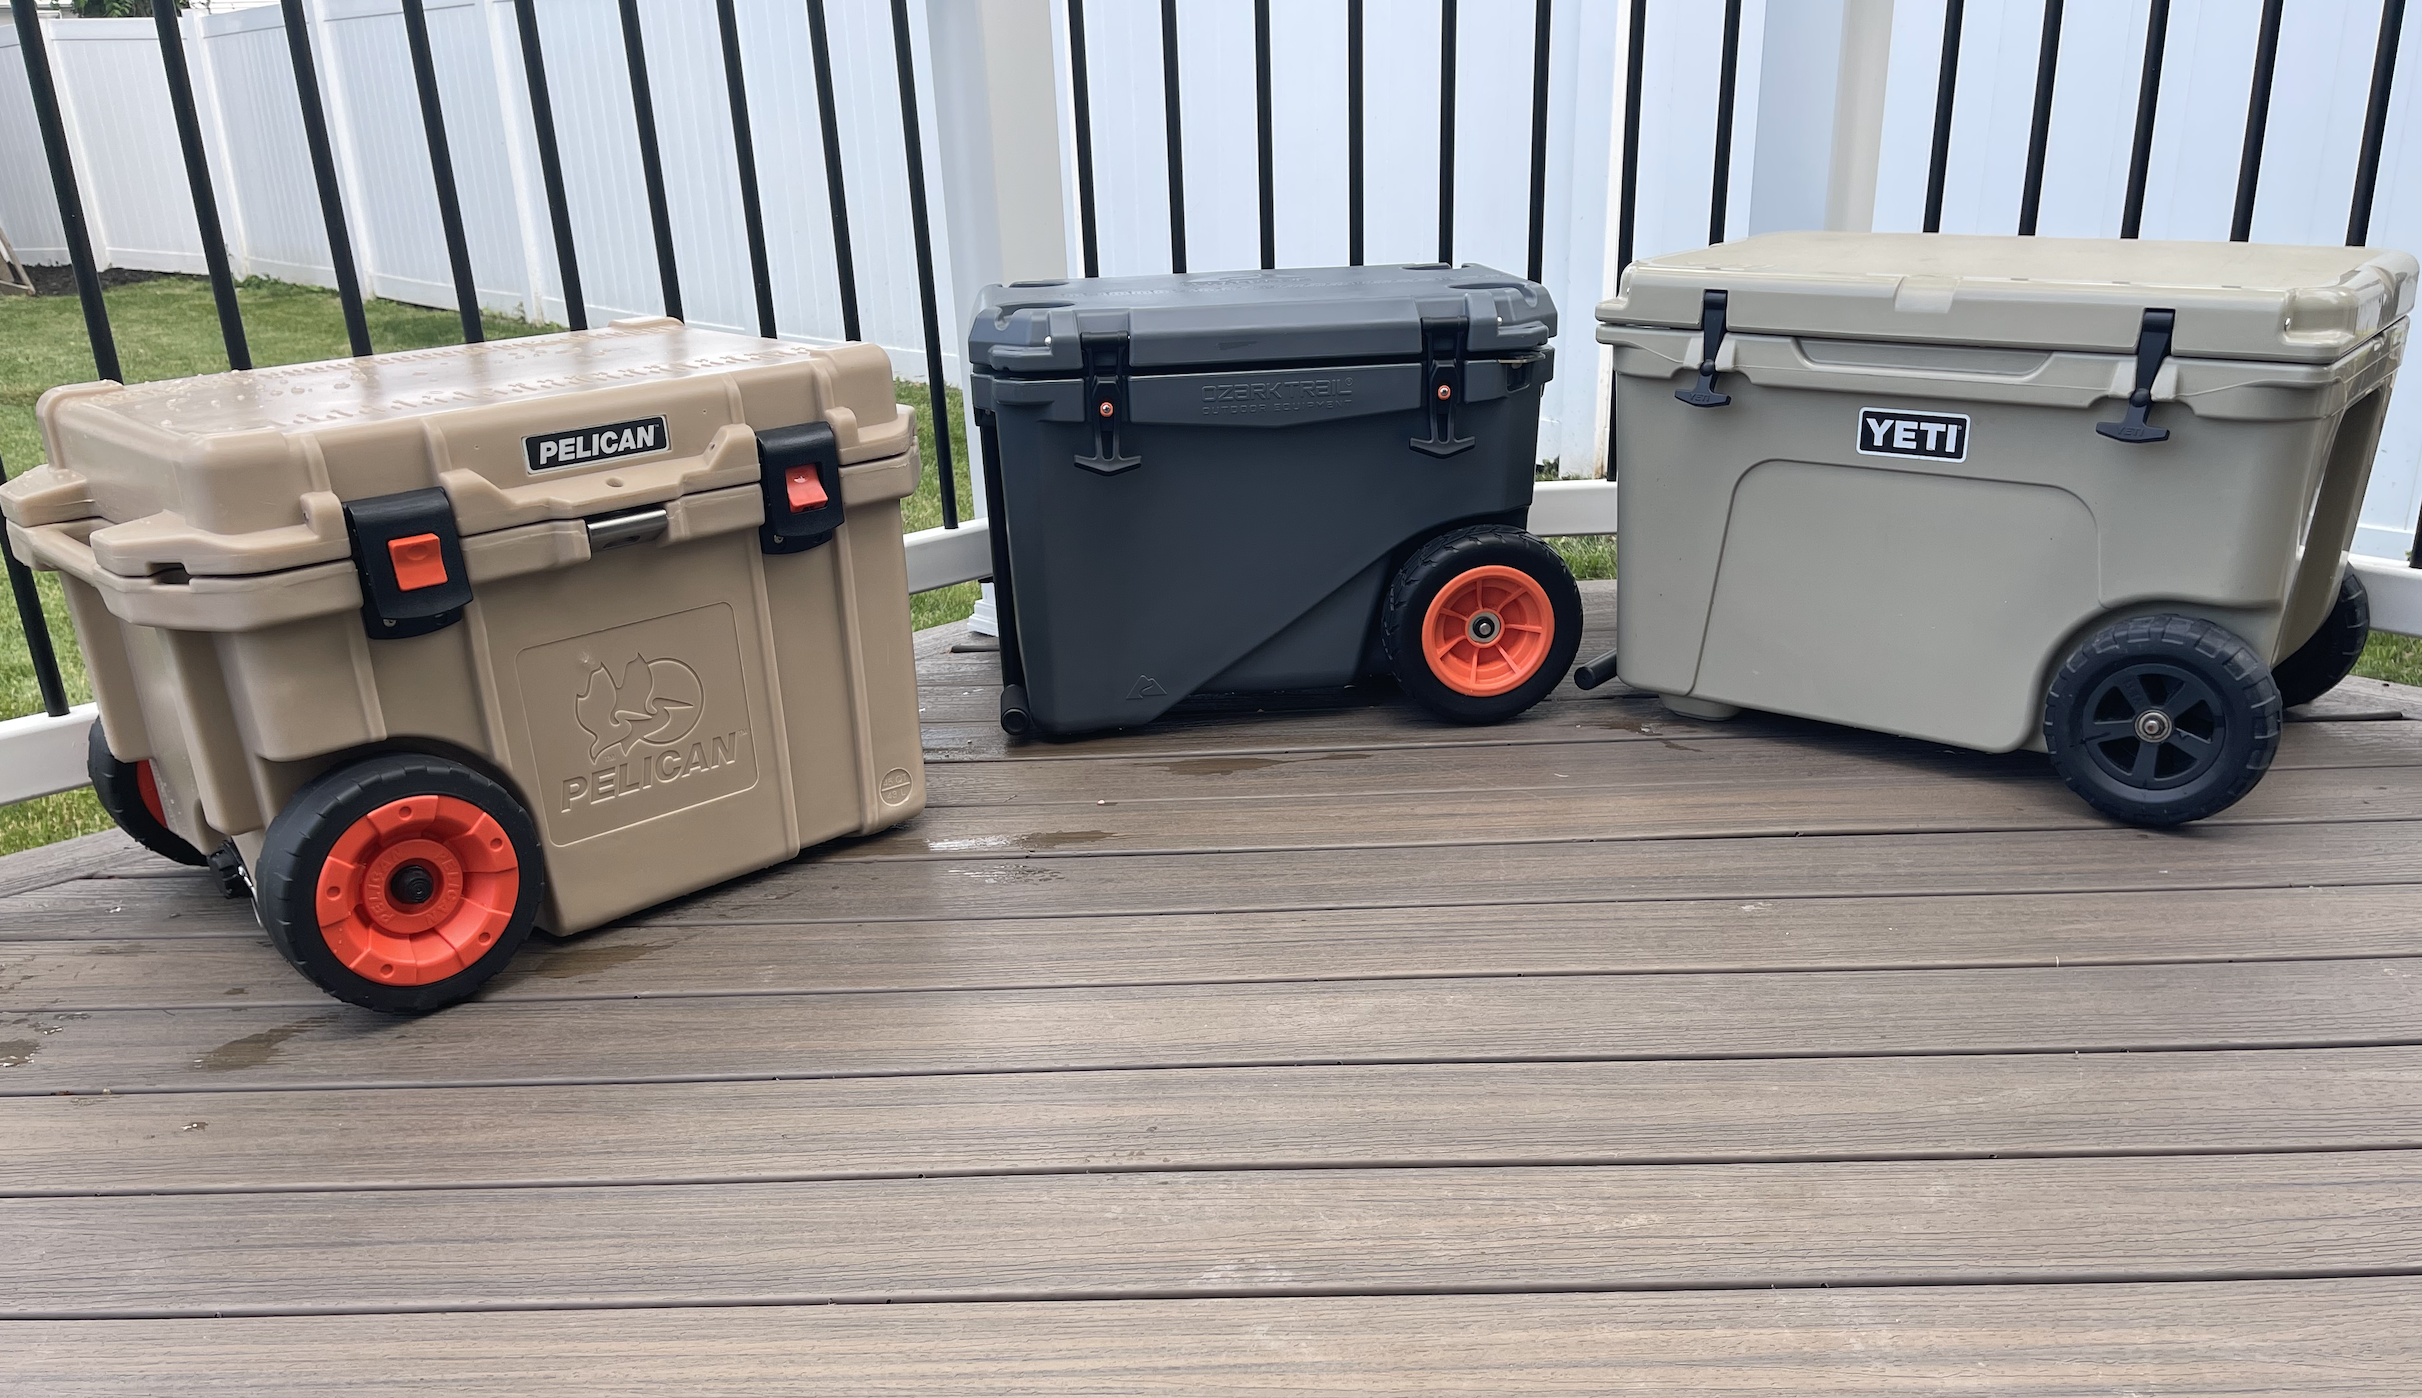 WHEELED COOLERS - Yeti Coolers